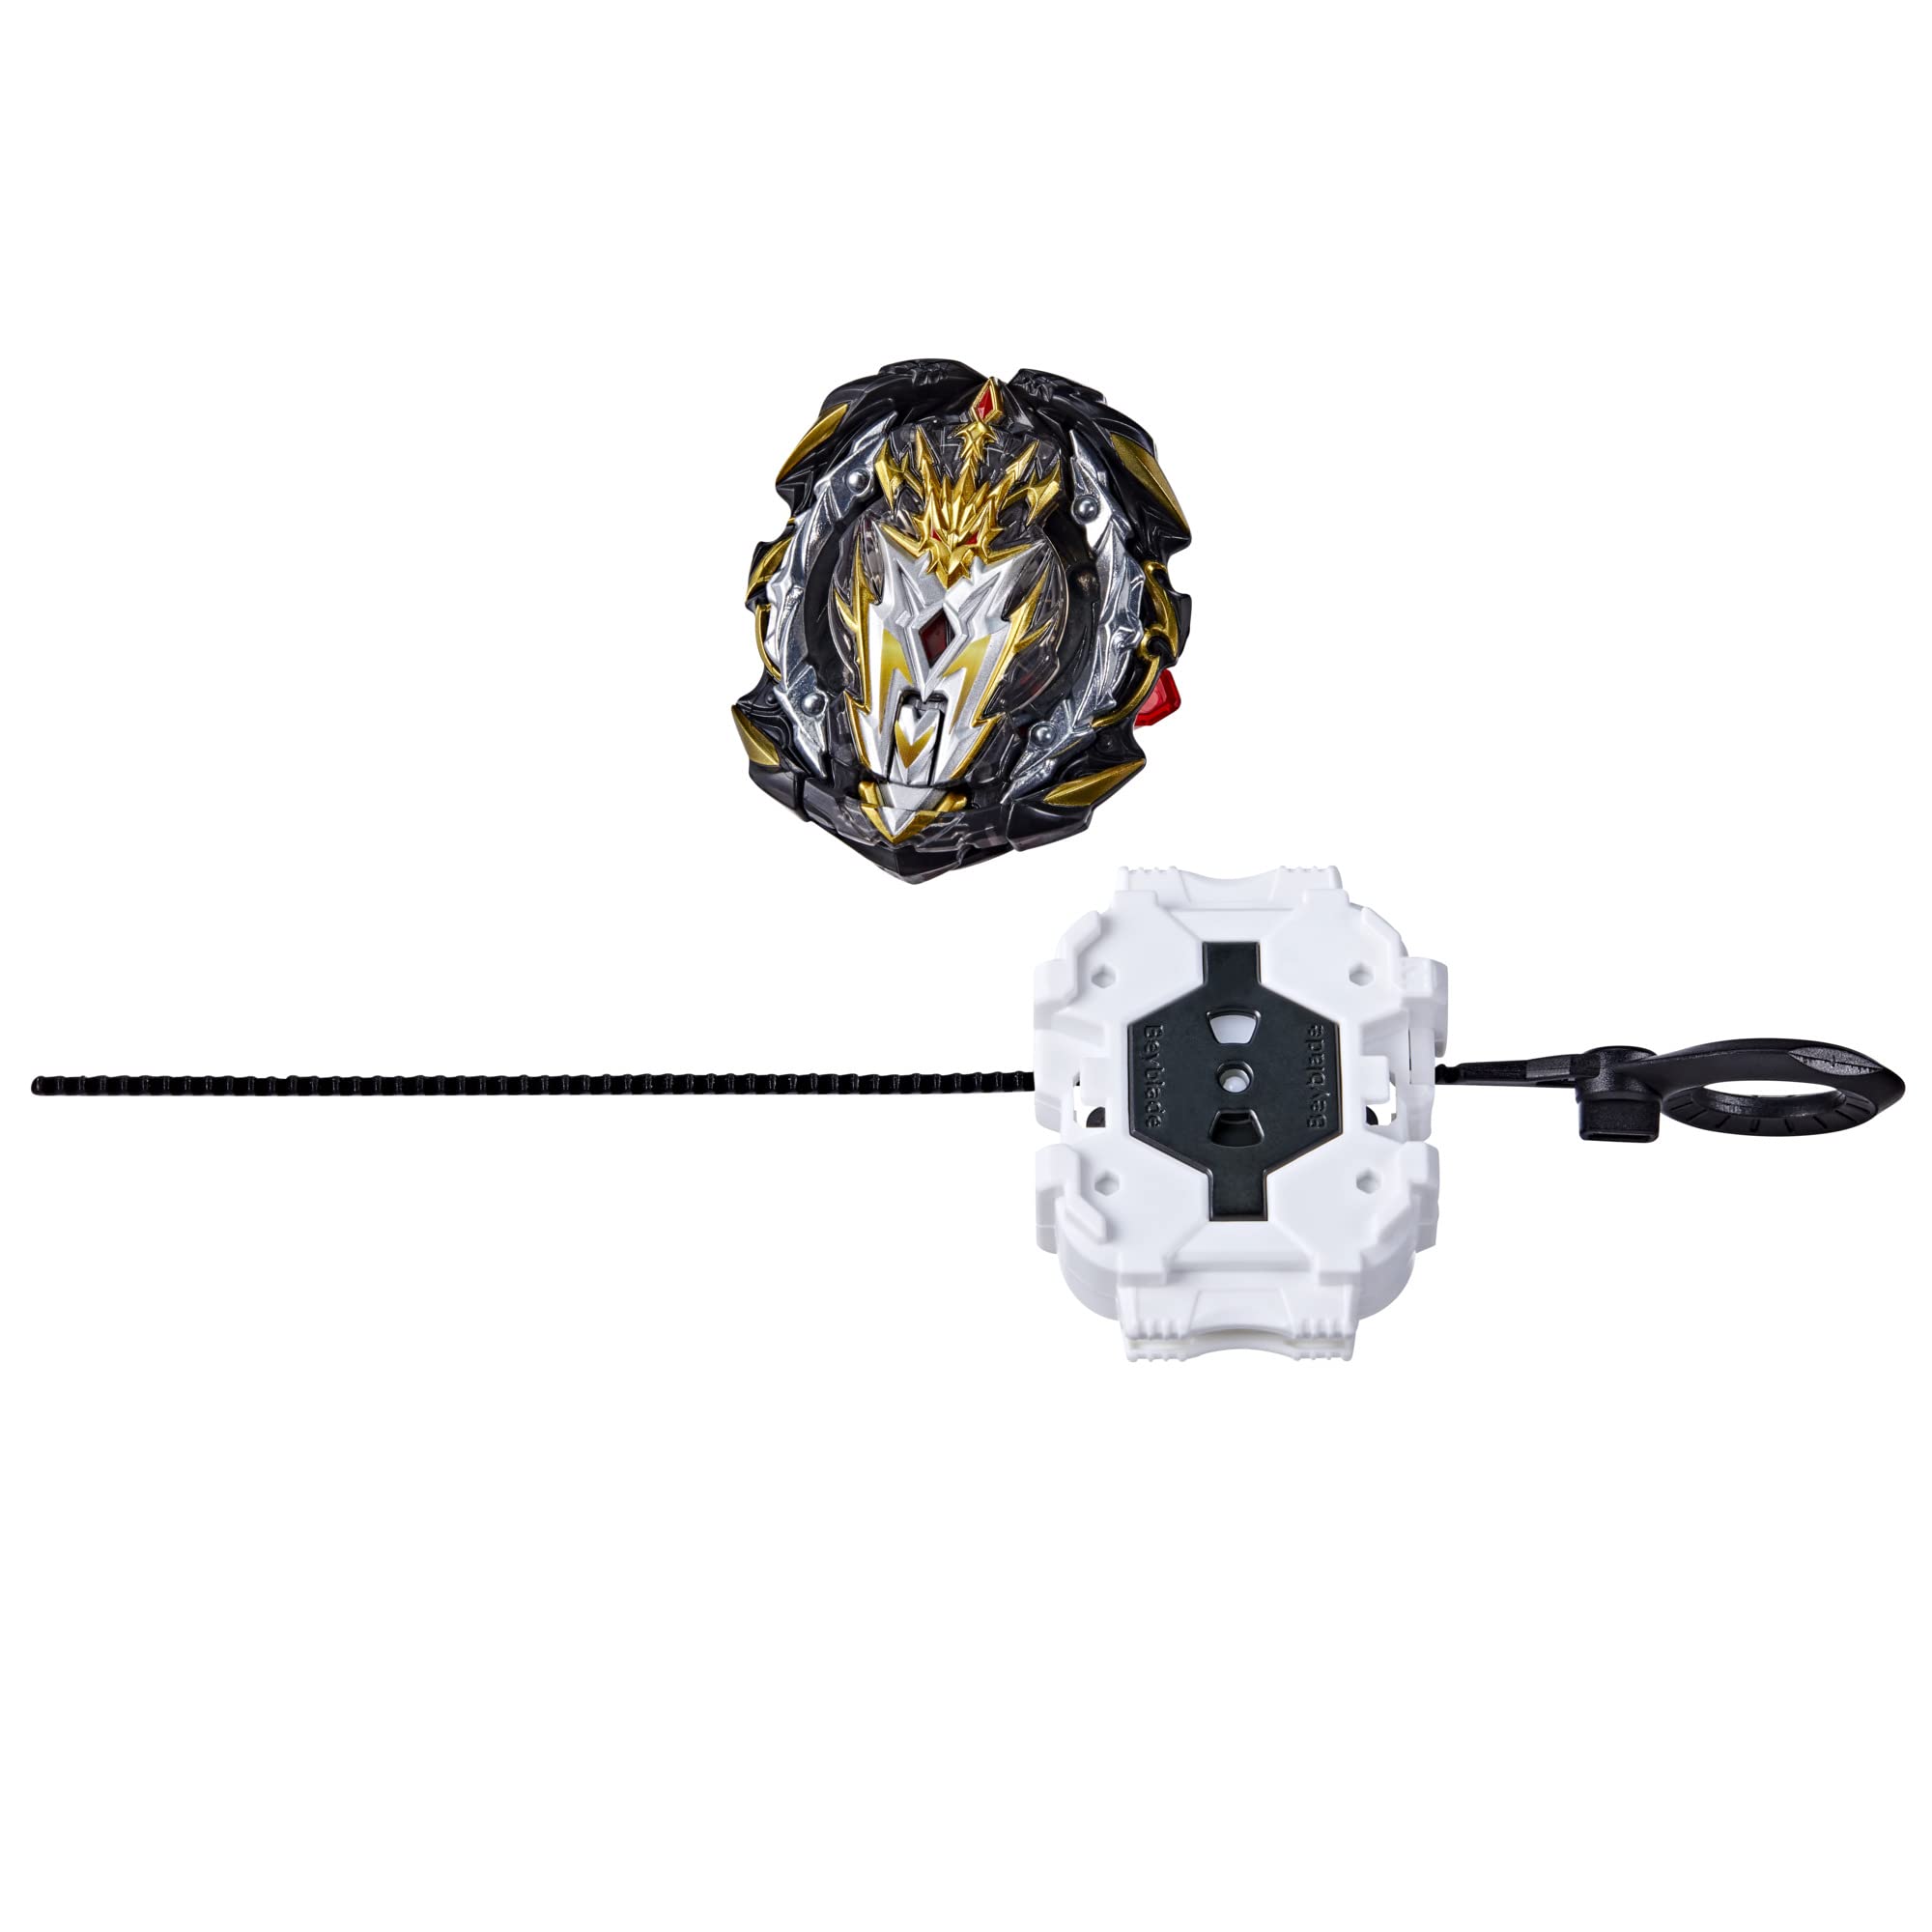 BEYBLADE Burst Pro Series Prime Apocalypse Spinning Top Starter Pack - Attack Type Battling Game Top with Launcher Toy